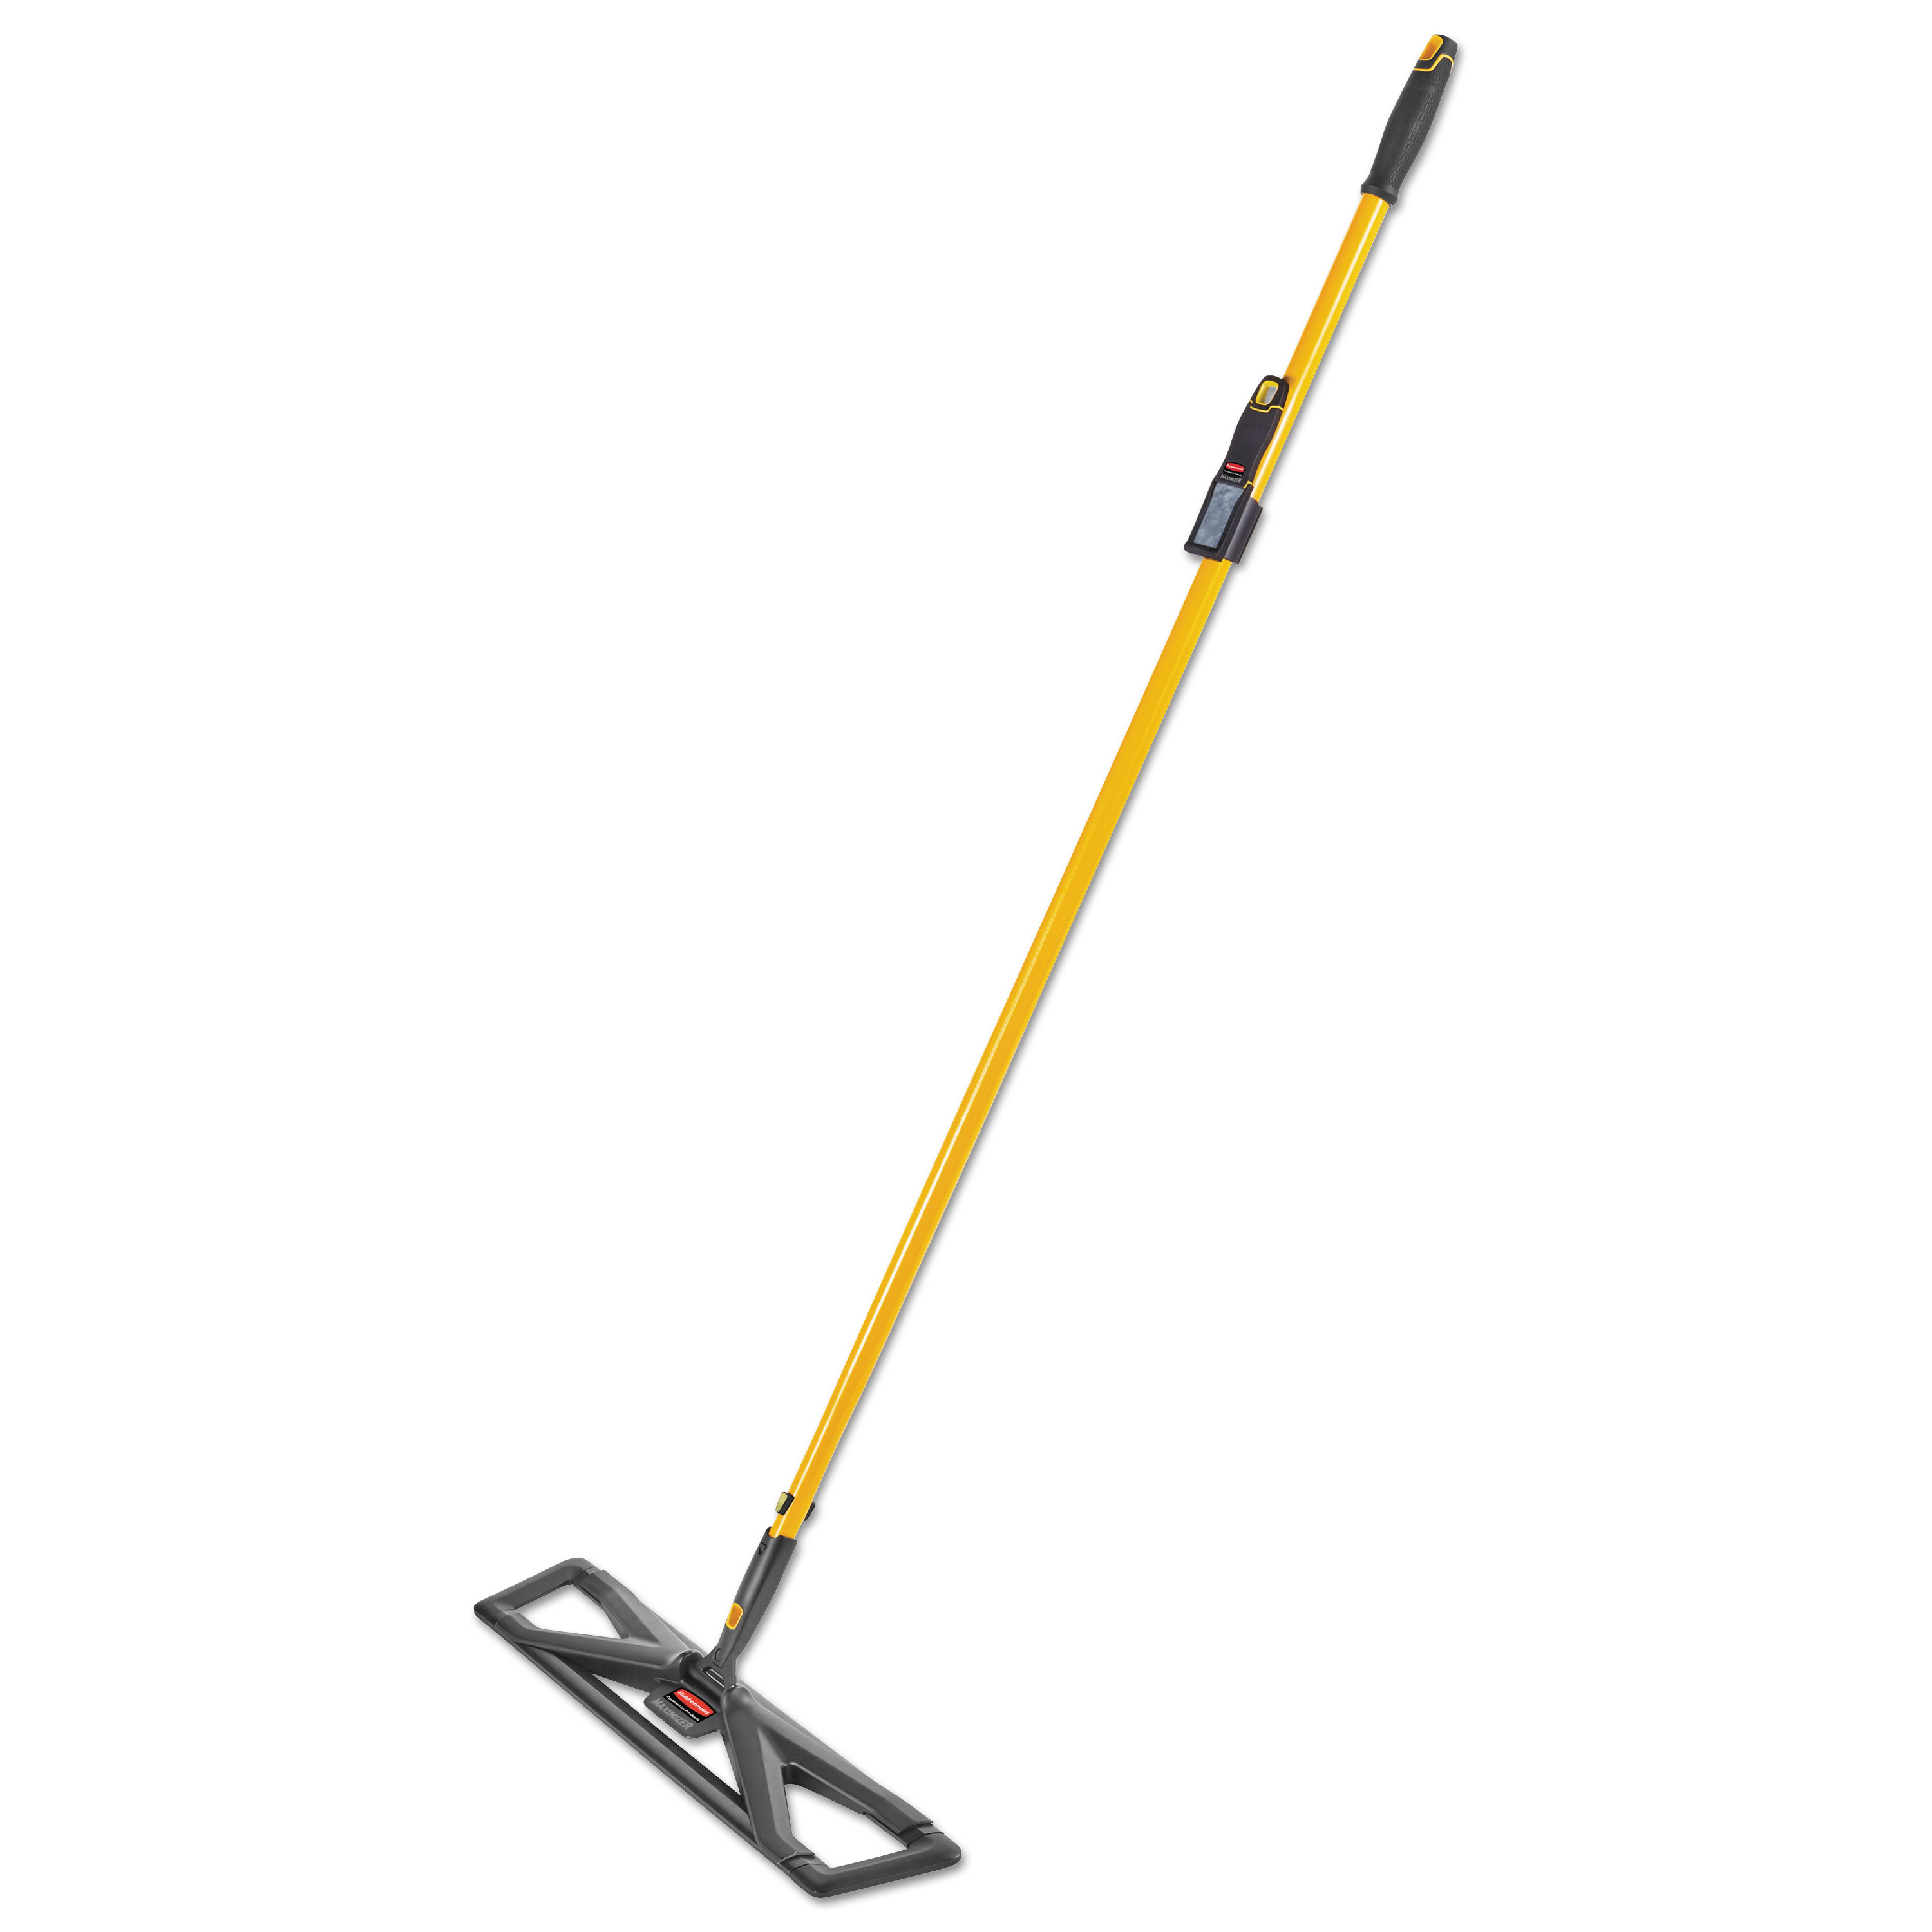  Rubbermaid Commercial 2018808 Maximizer Dust Mop Frame with Handle and Scraper, 24 x 5.5, Yellow/Black (RCP2018808) 